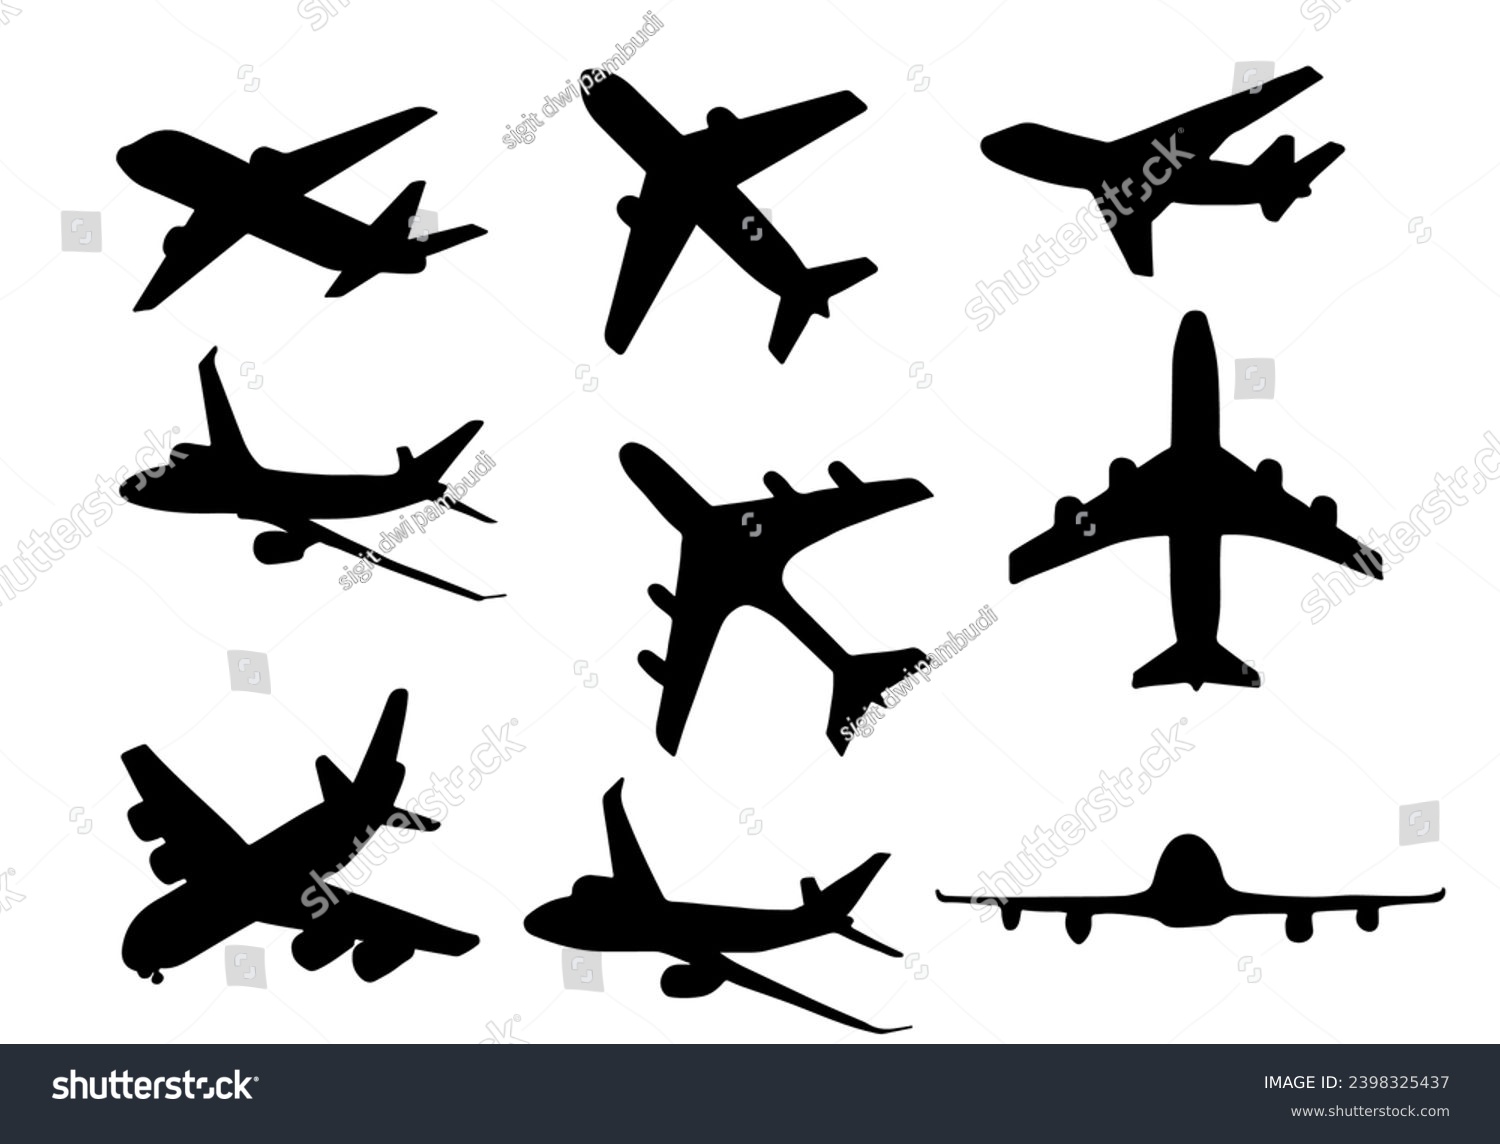 SVG of Collection of hand drawn airplane silhouettes svg